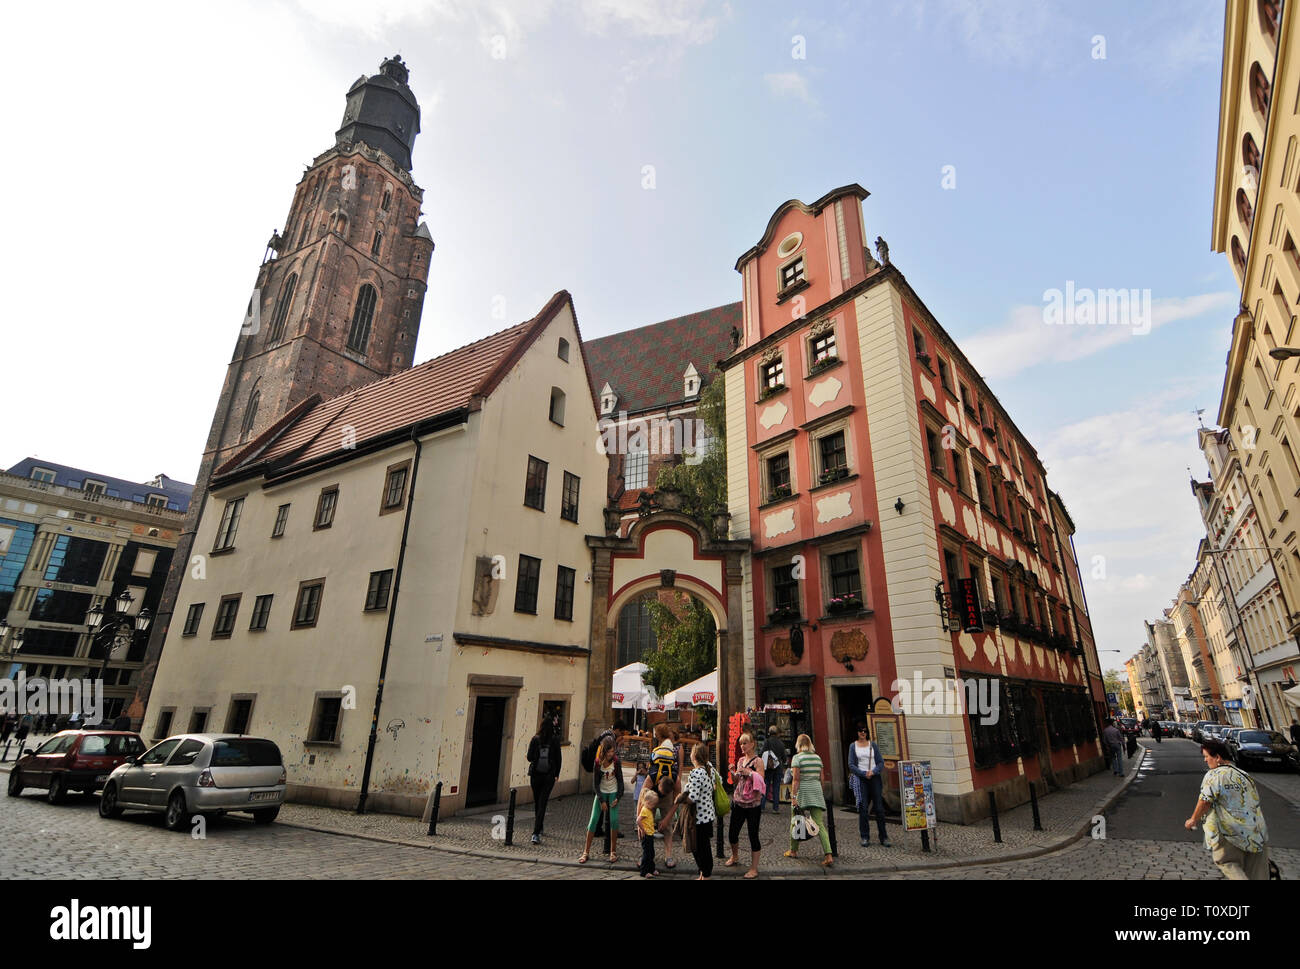 Wroclaw Old Town, Polonia Foto Stock